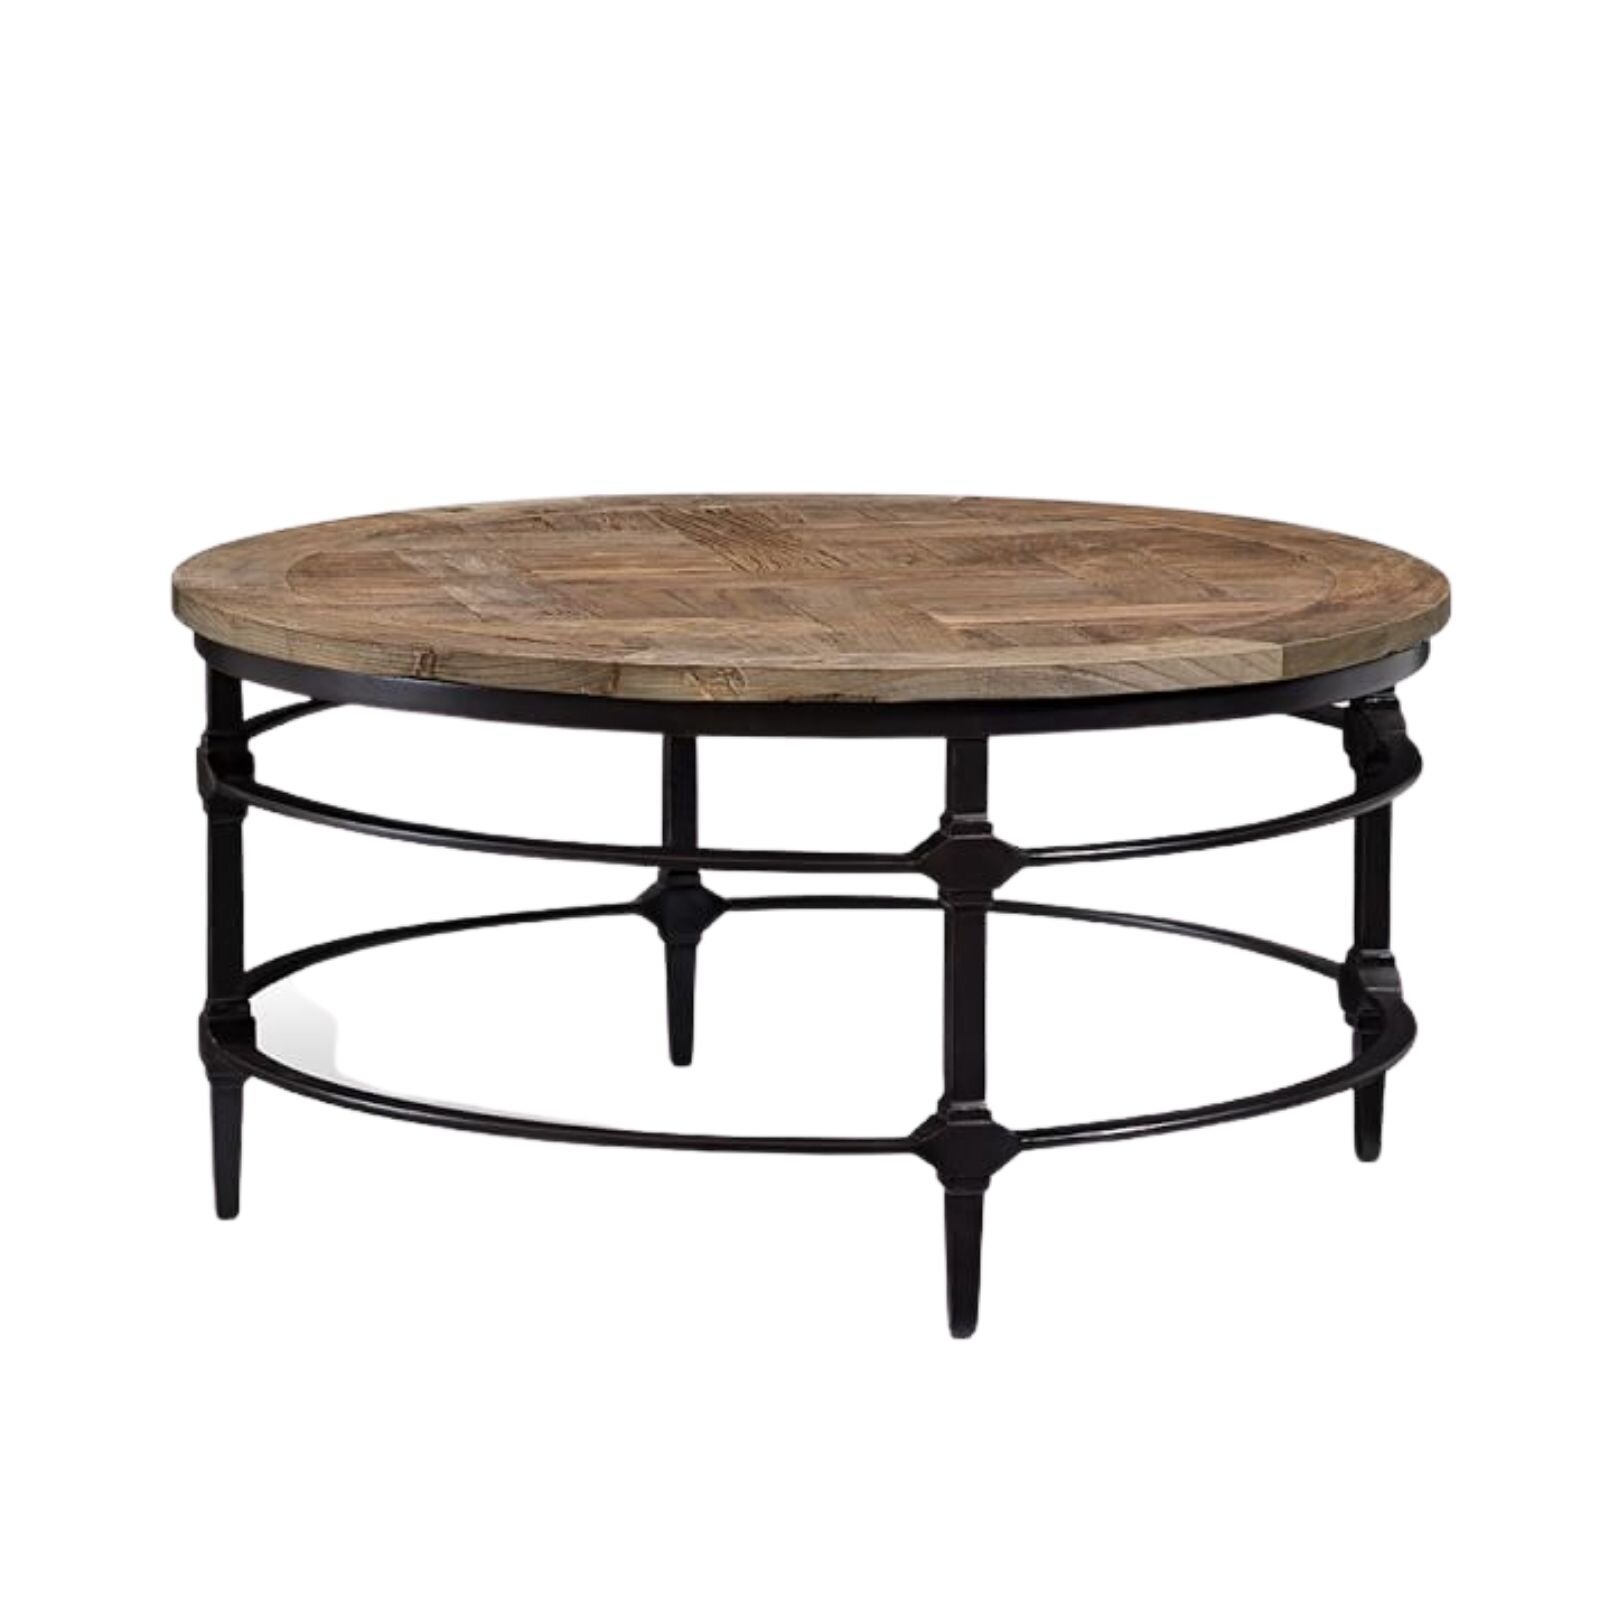 Parquet 36" Round Reclaimed Wood Coffee Table